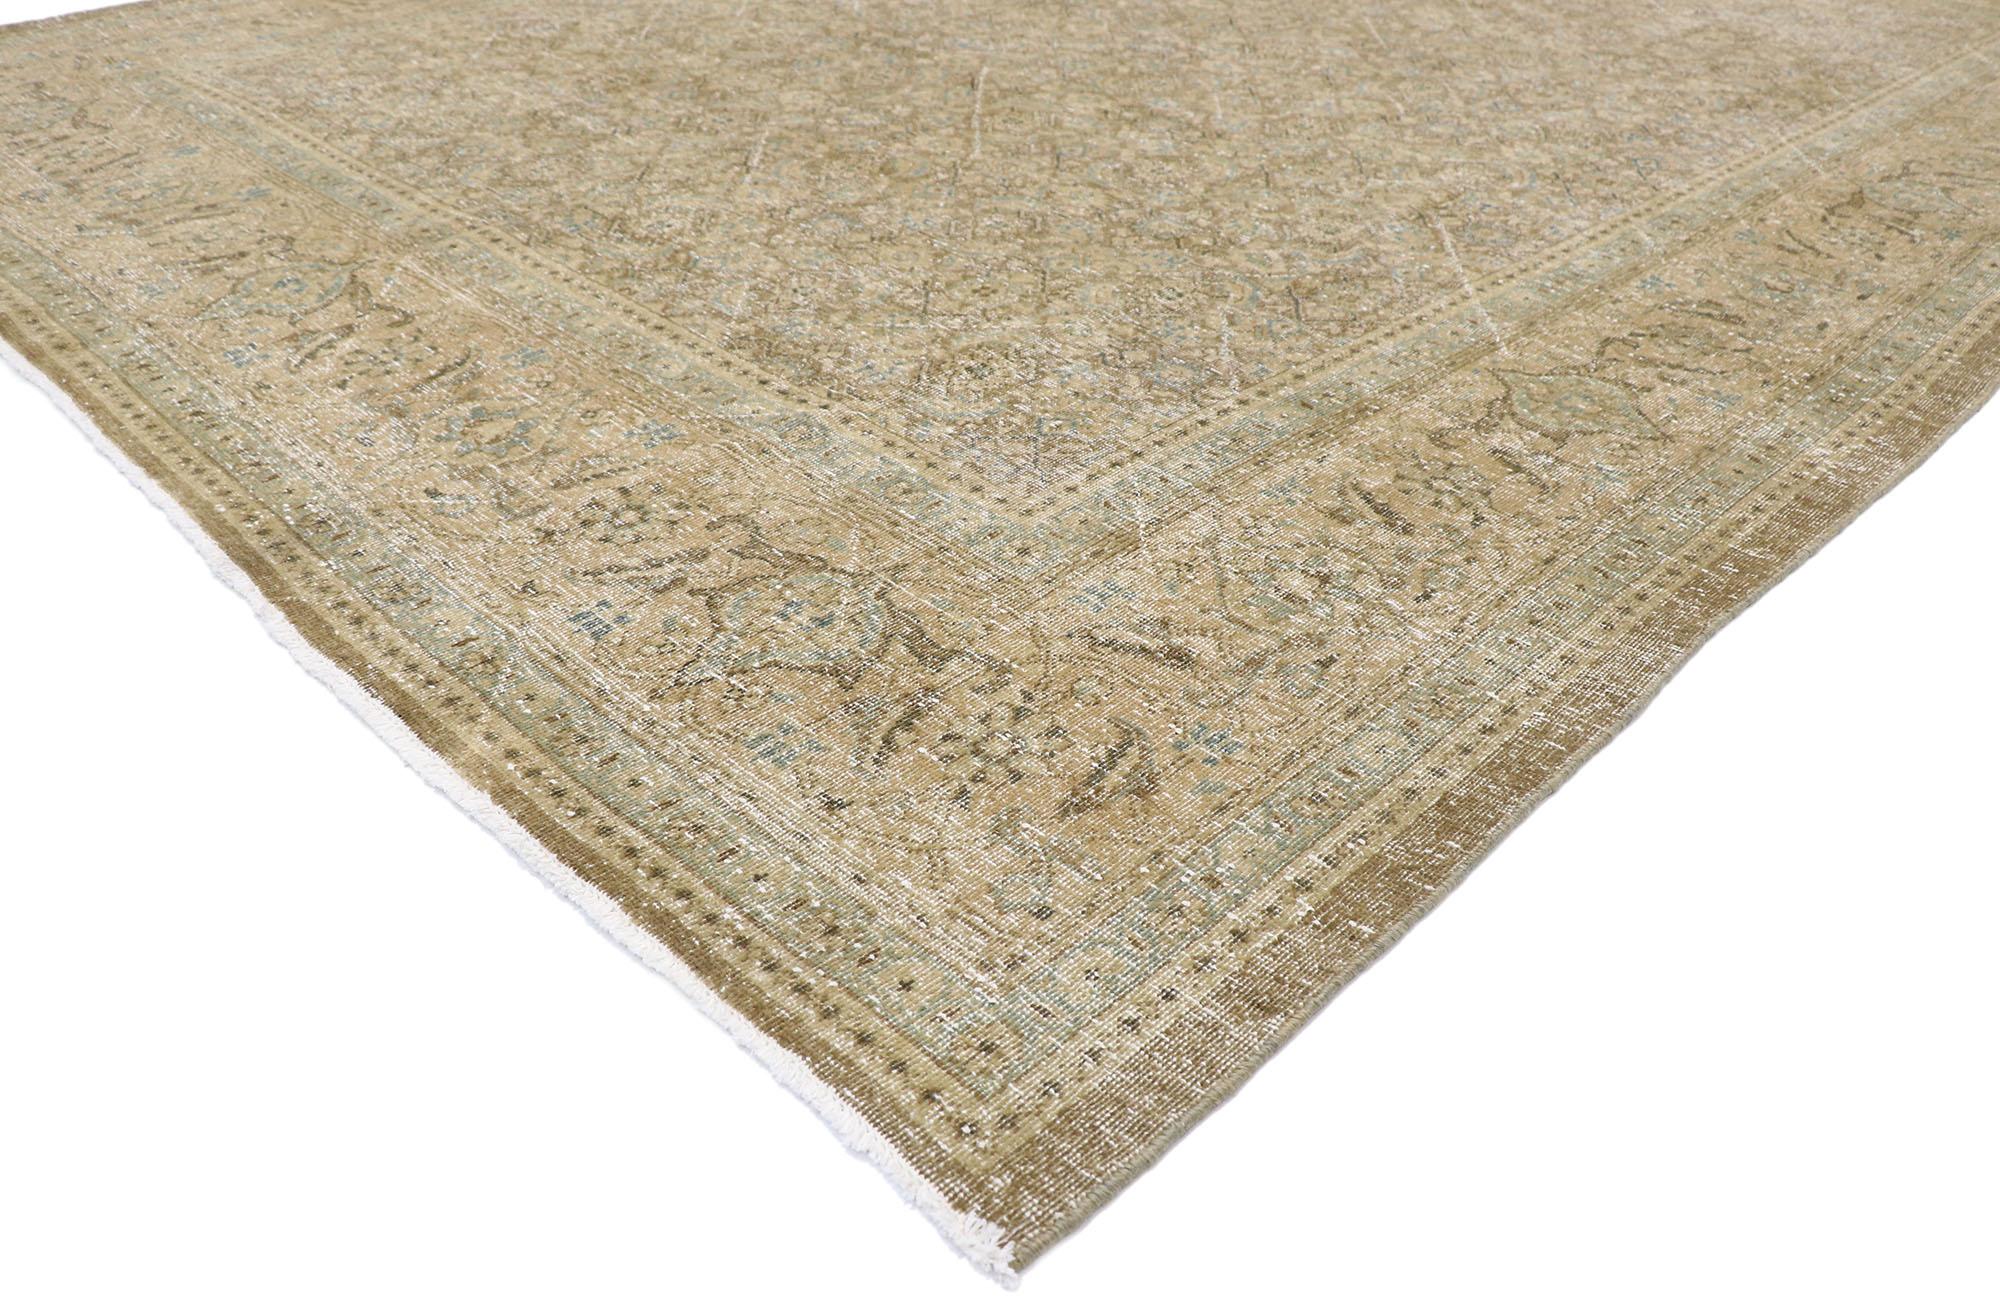 60827 Distressed antique Persian Mahal rug with Modern Rustic Shaker style. Warm and inviting with a timeless design, this hand-knotted wool distressed antique Persian Mahal rug features an all-over Herati pattern. The Classic Herati design, also